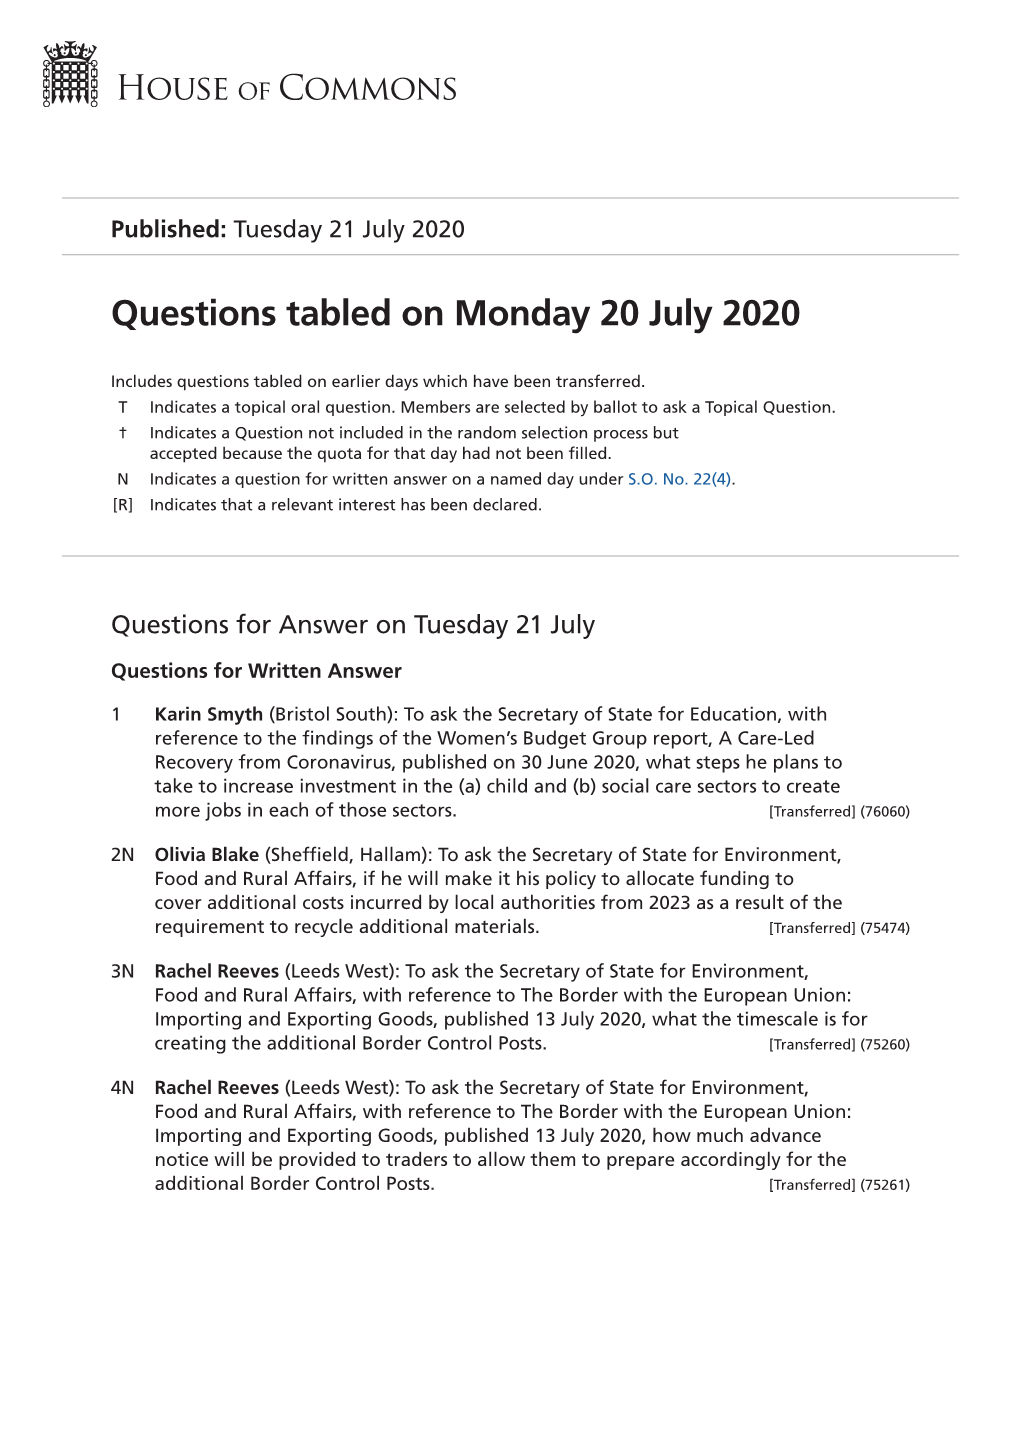 Questions Tabled on Monday 20 July 2020